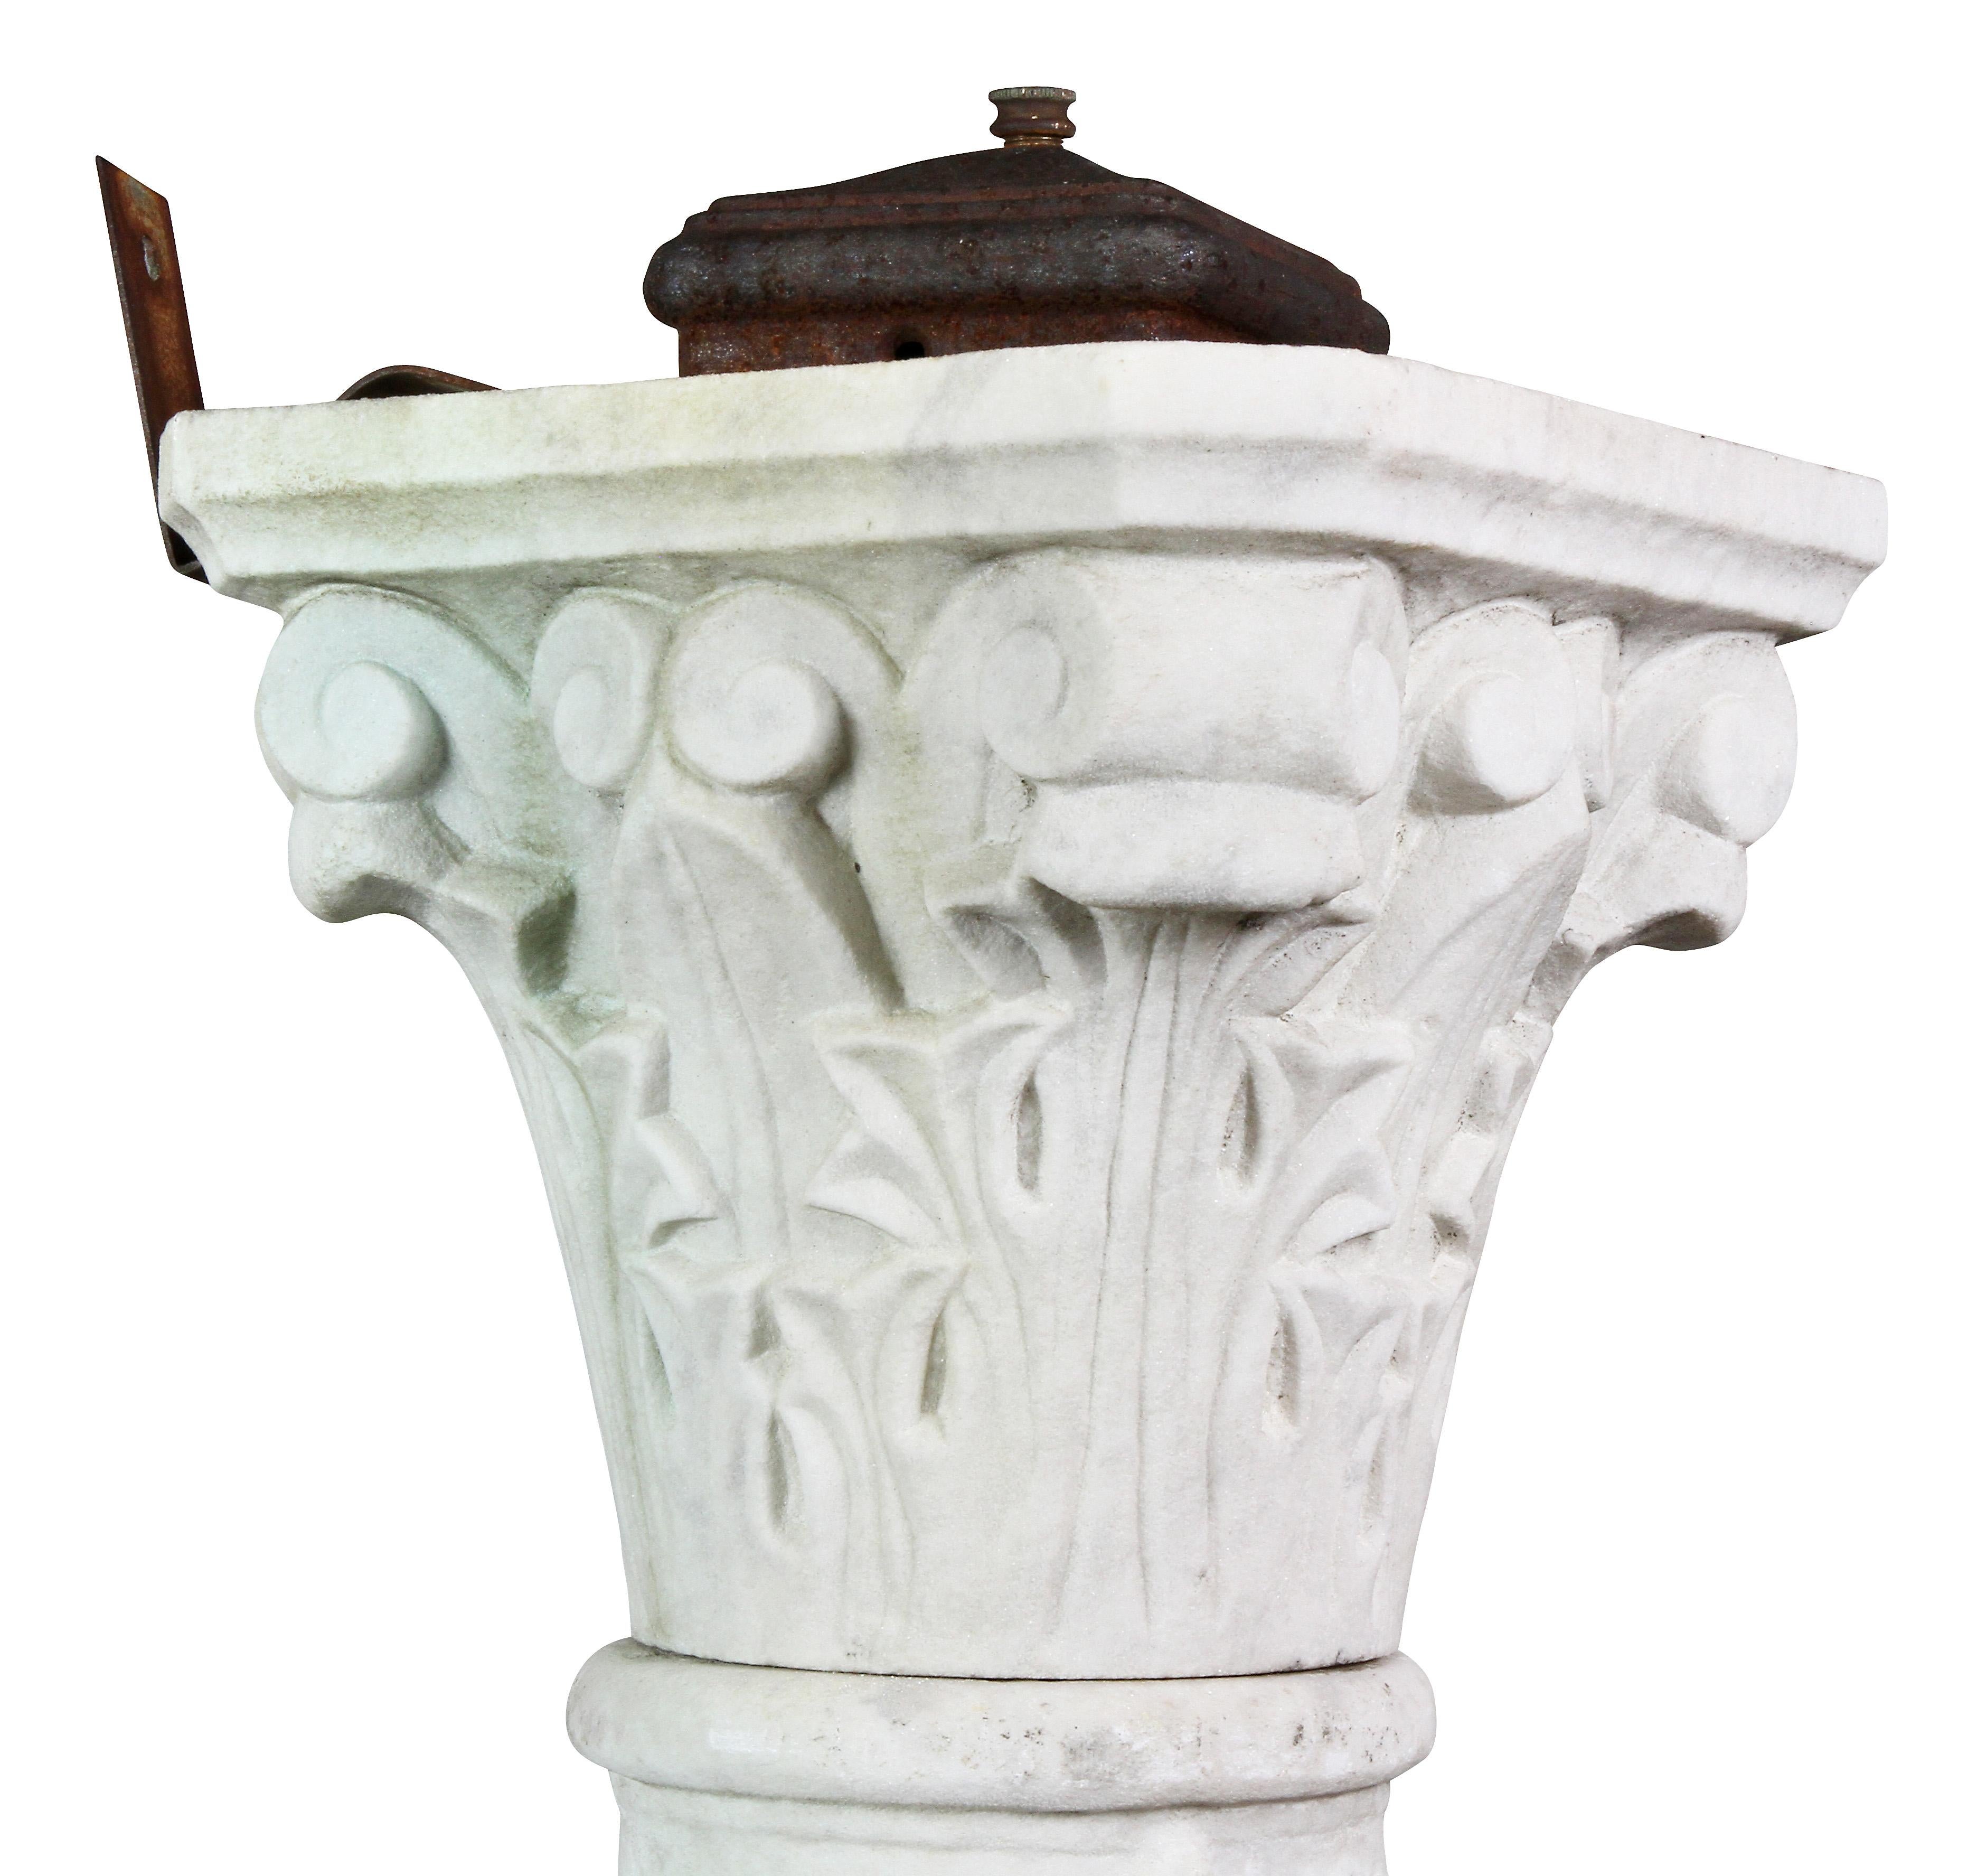 Originally used in a garden and was electrified. Stylized Corinthian capitol with the remains of an old metal switch box, grape and grapevine carved column, square stepped base.